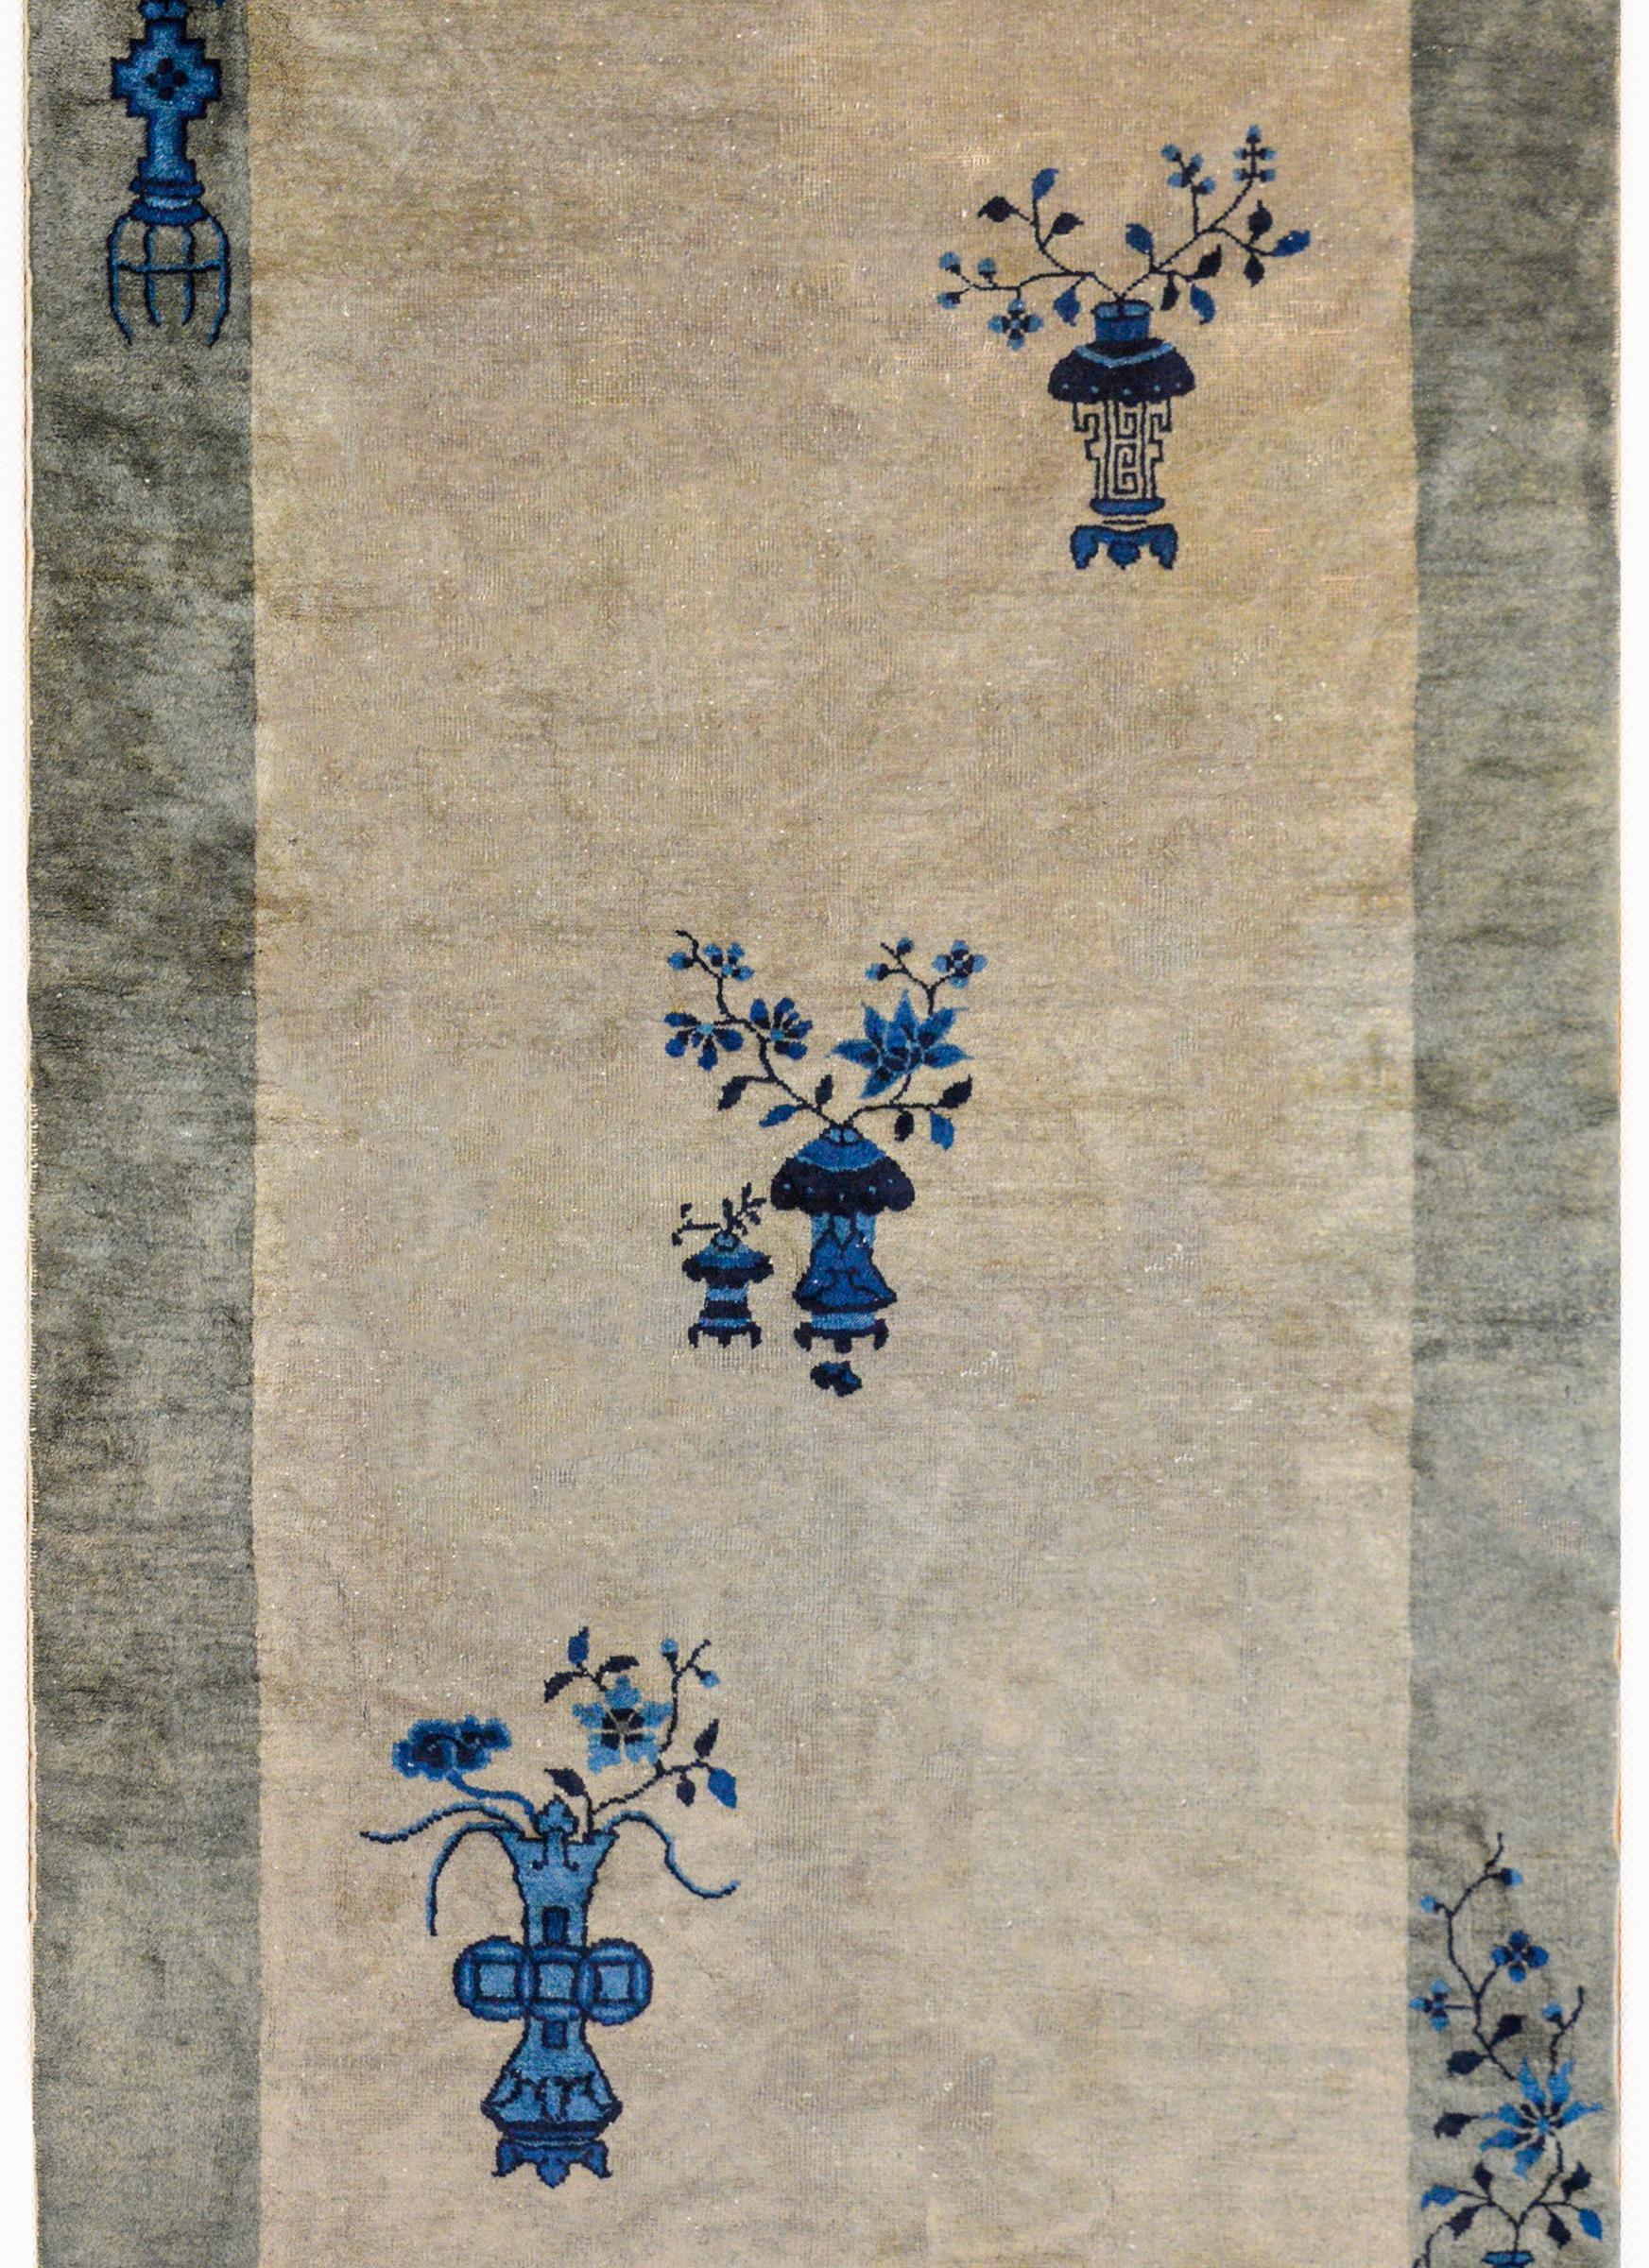 A wonderful Chinese Art Deco rug with a light gray field surrounded by a wide darker gray border. The field contains three potted vases with peonies and cherry blossoms while the border contains a vase potted with chrysanthemum and peonies in